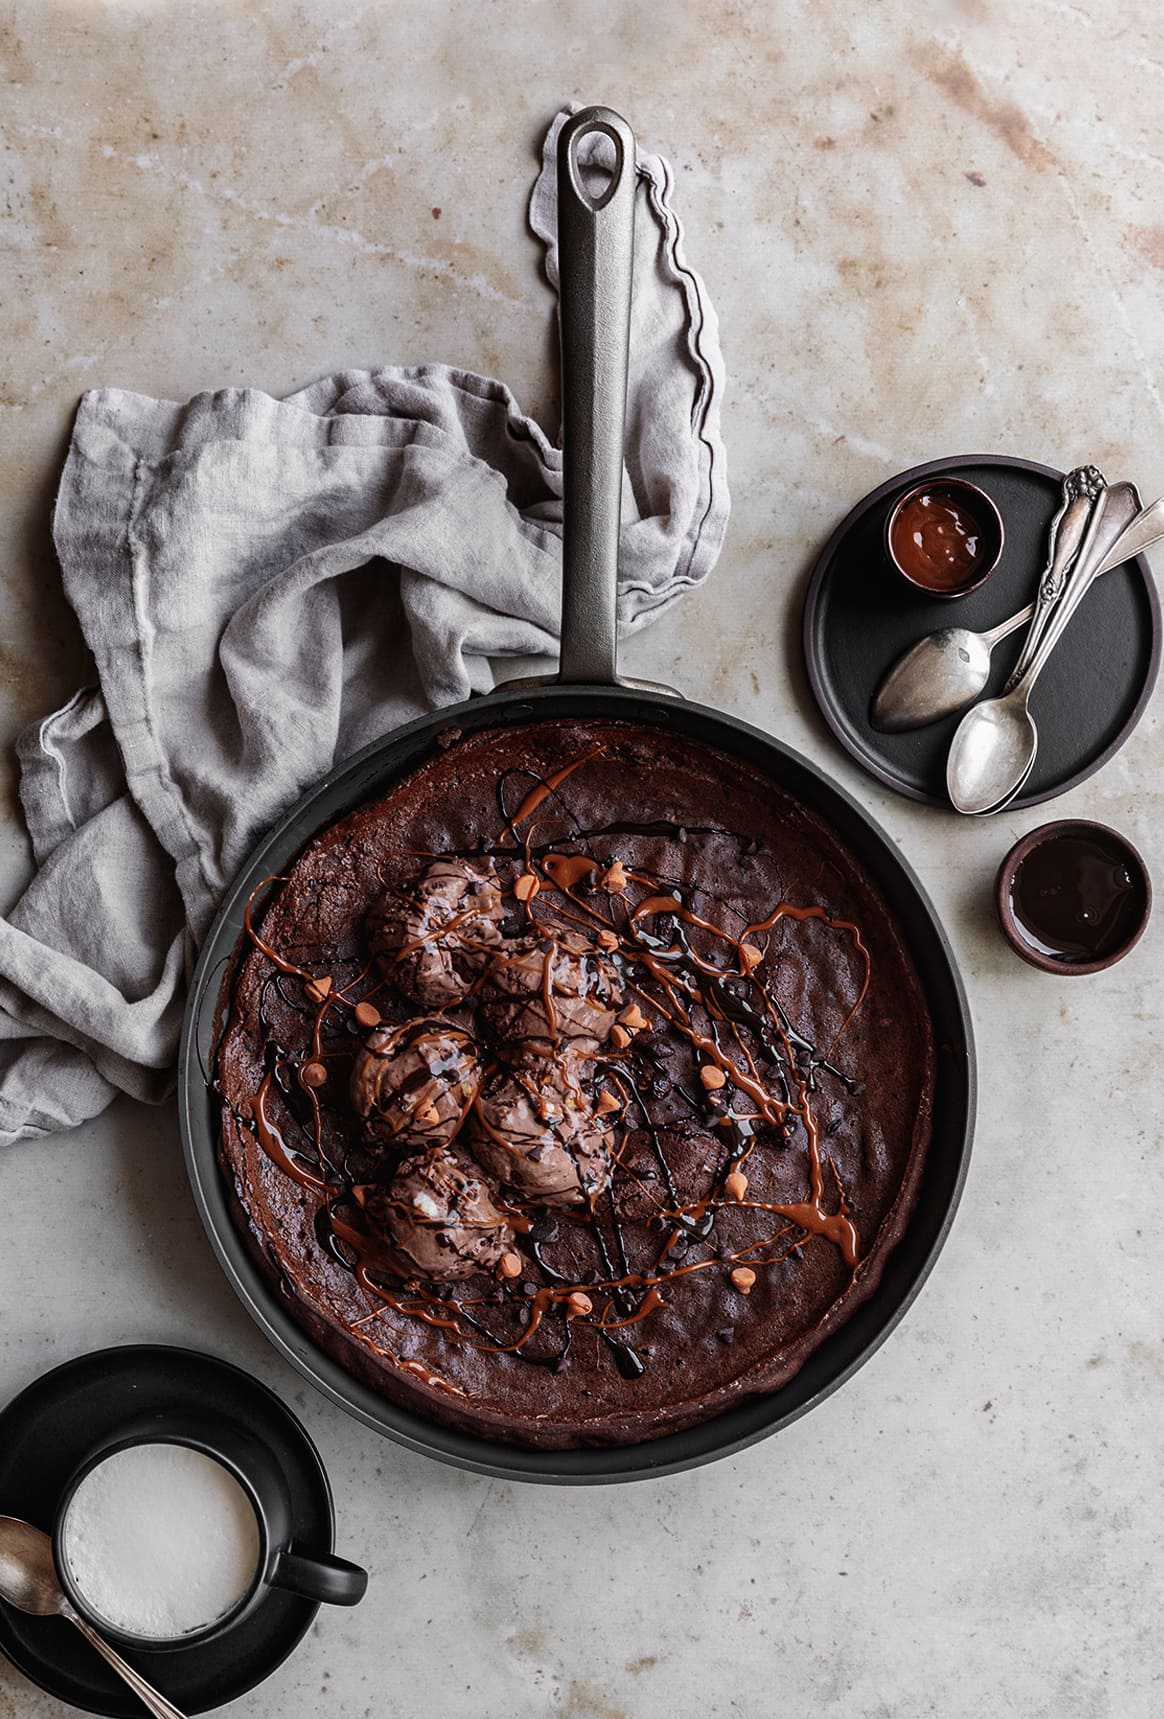 This warm Triple Chocolate Dutch Baby with a puffy center and crispy edges, served with chocolate ice cream, makes the perfect shareable dessert any time of the year!